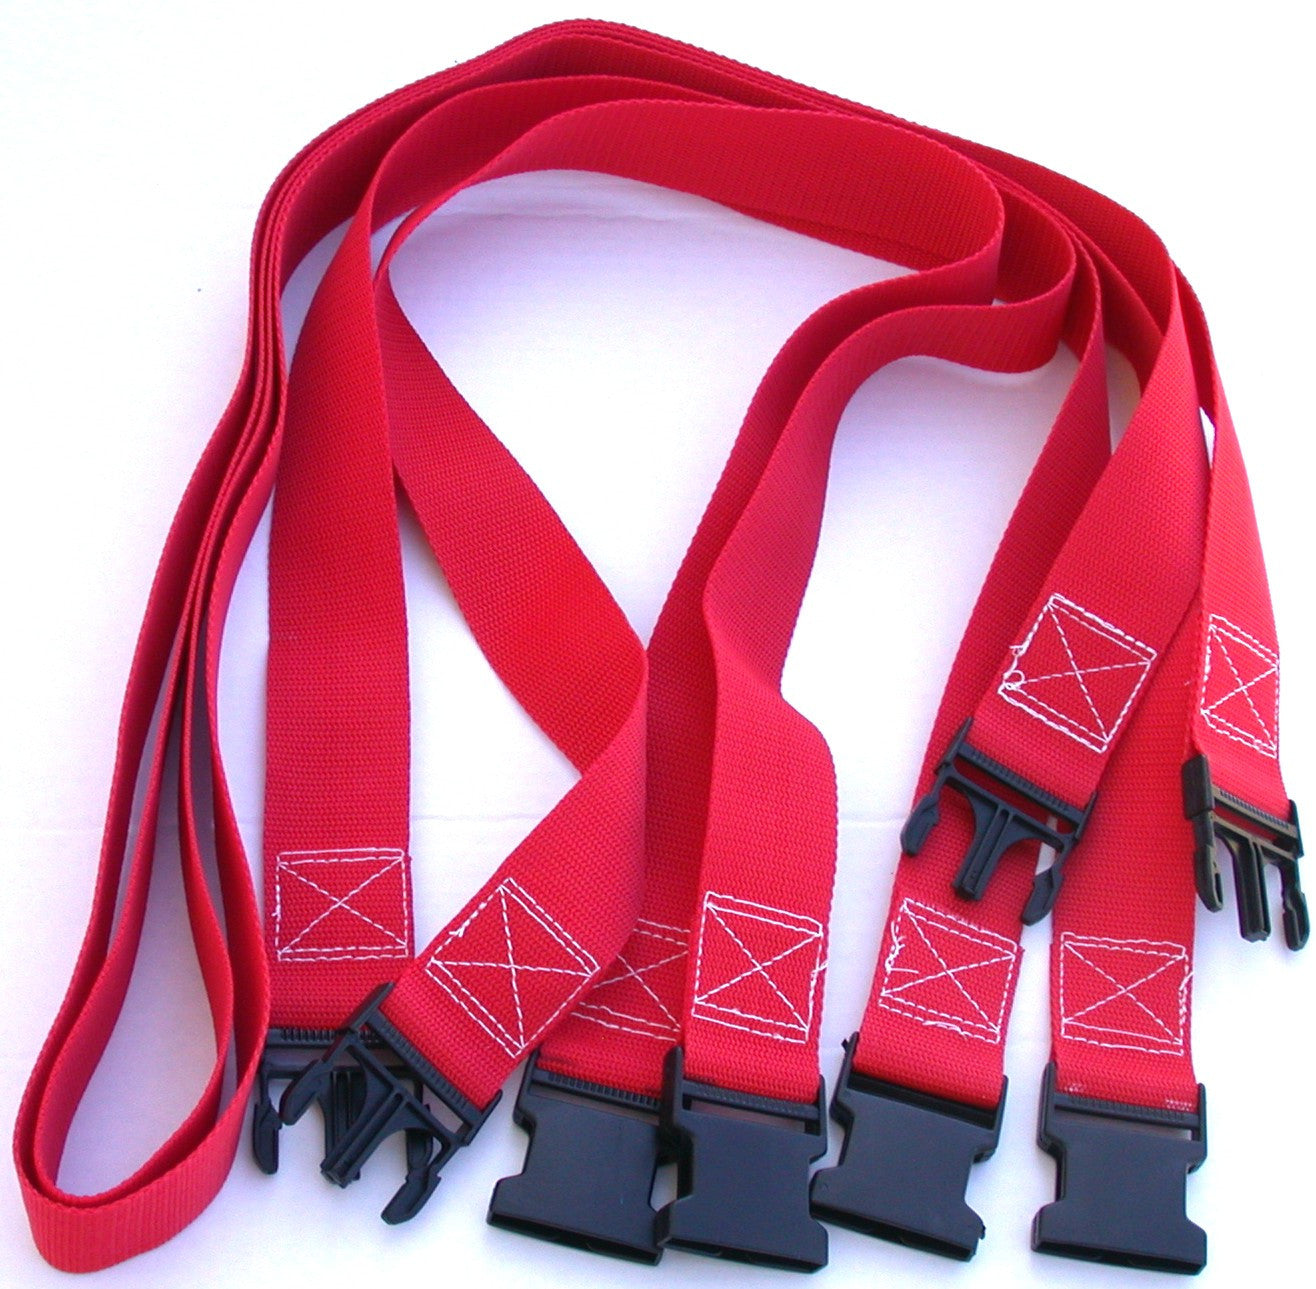 M8EXTR-Red webbing boundary extension lengths 26.3 to 30-ft court size